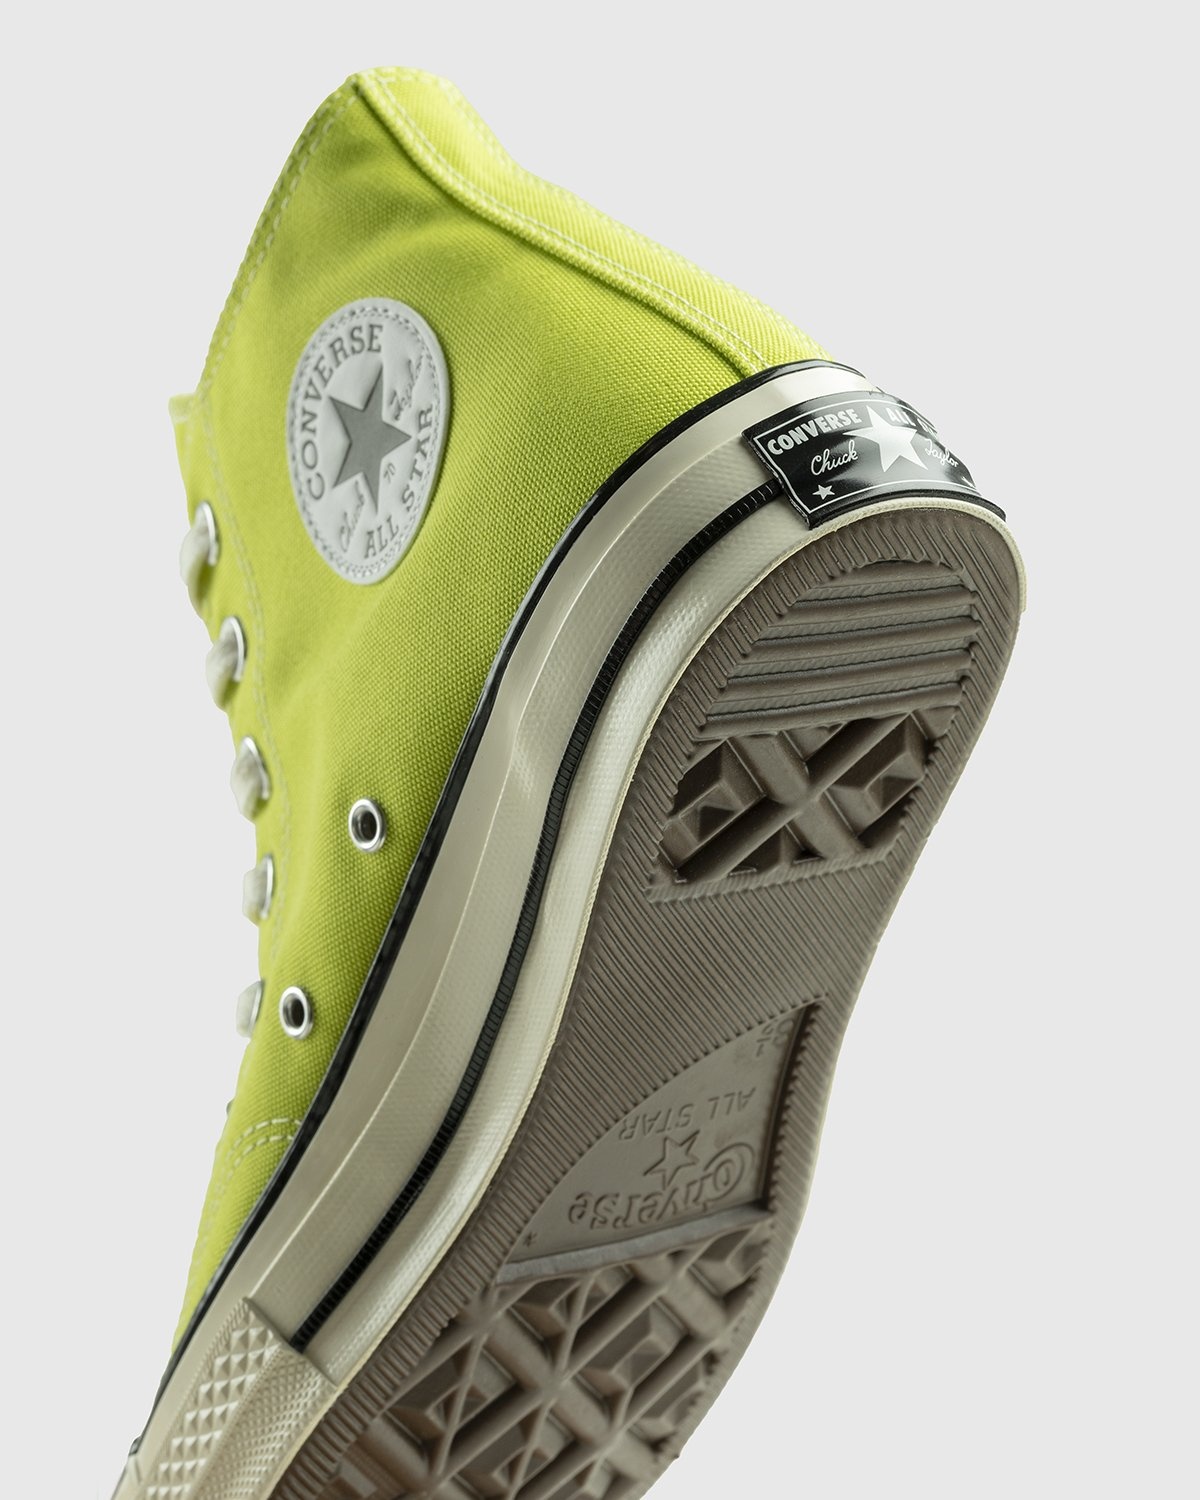 Converse – Chuck 70 Lime Twist Egret Black - Sneakers - Yellow - Image 5